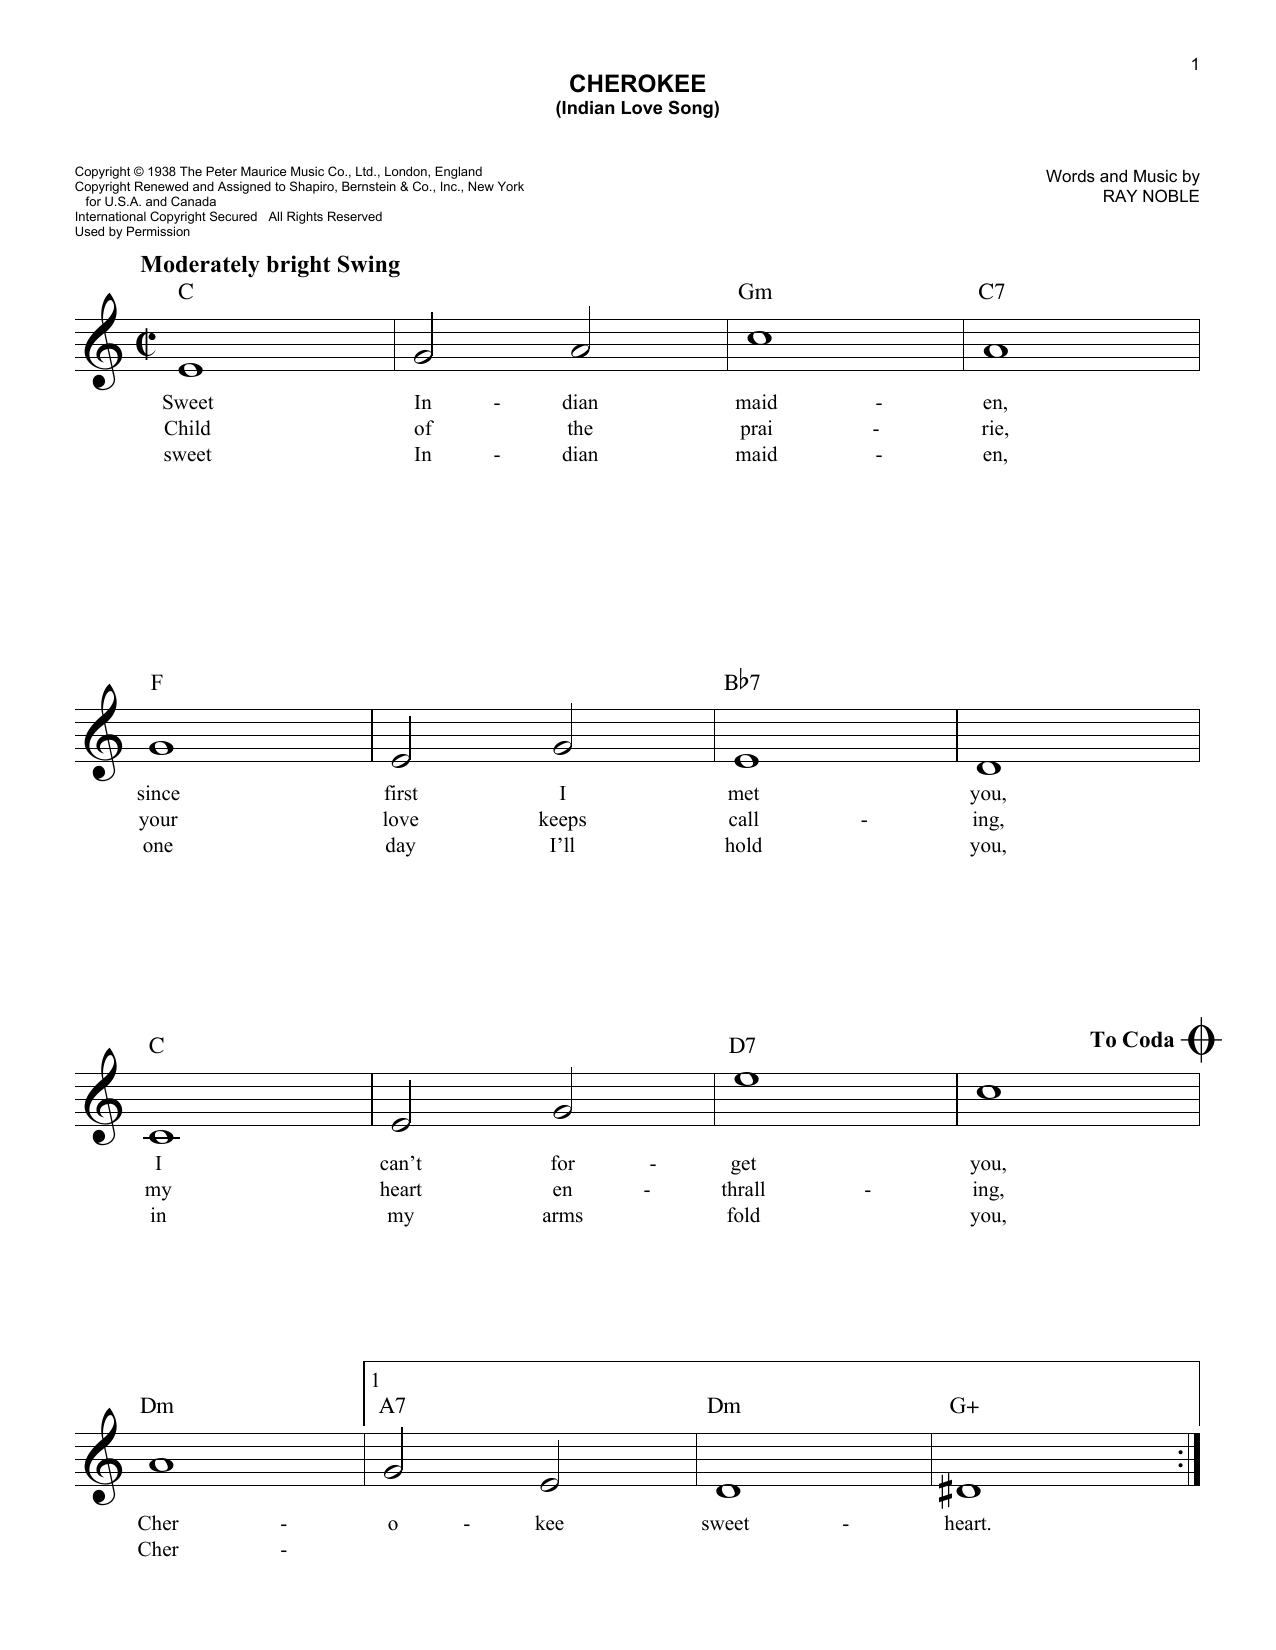 Download Ray Noble Cherokee (Indian Love Song) Sheet Music